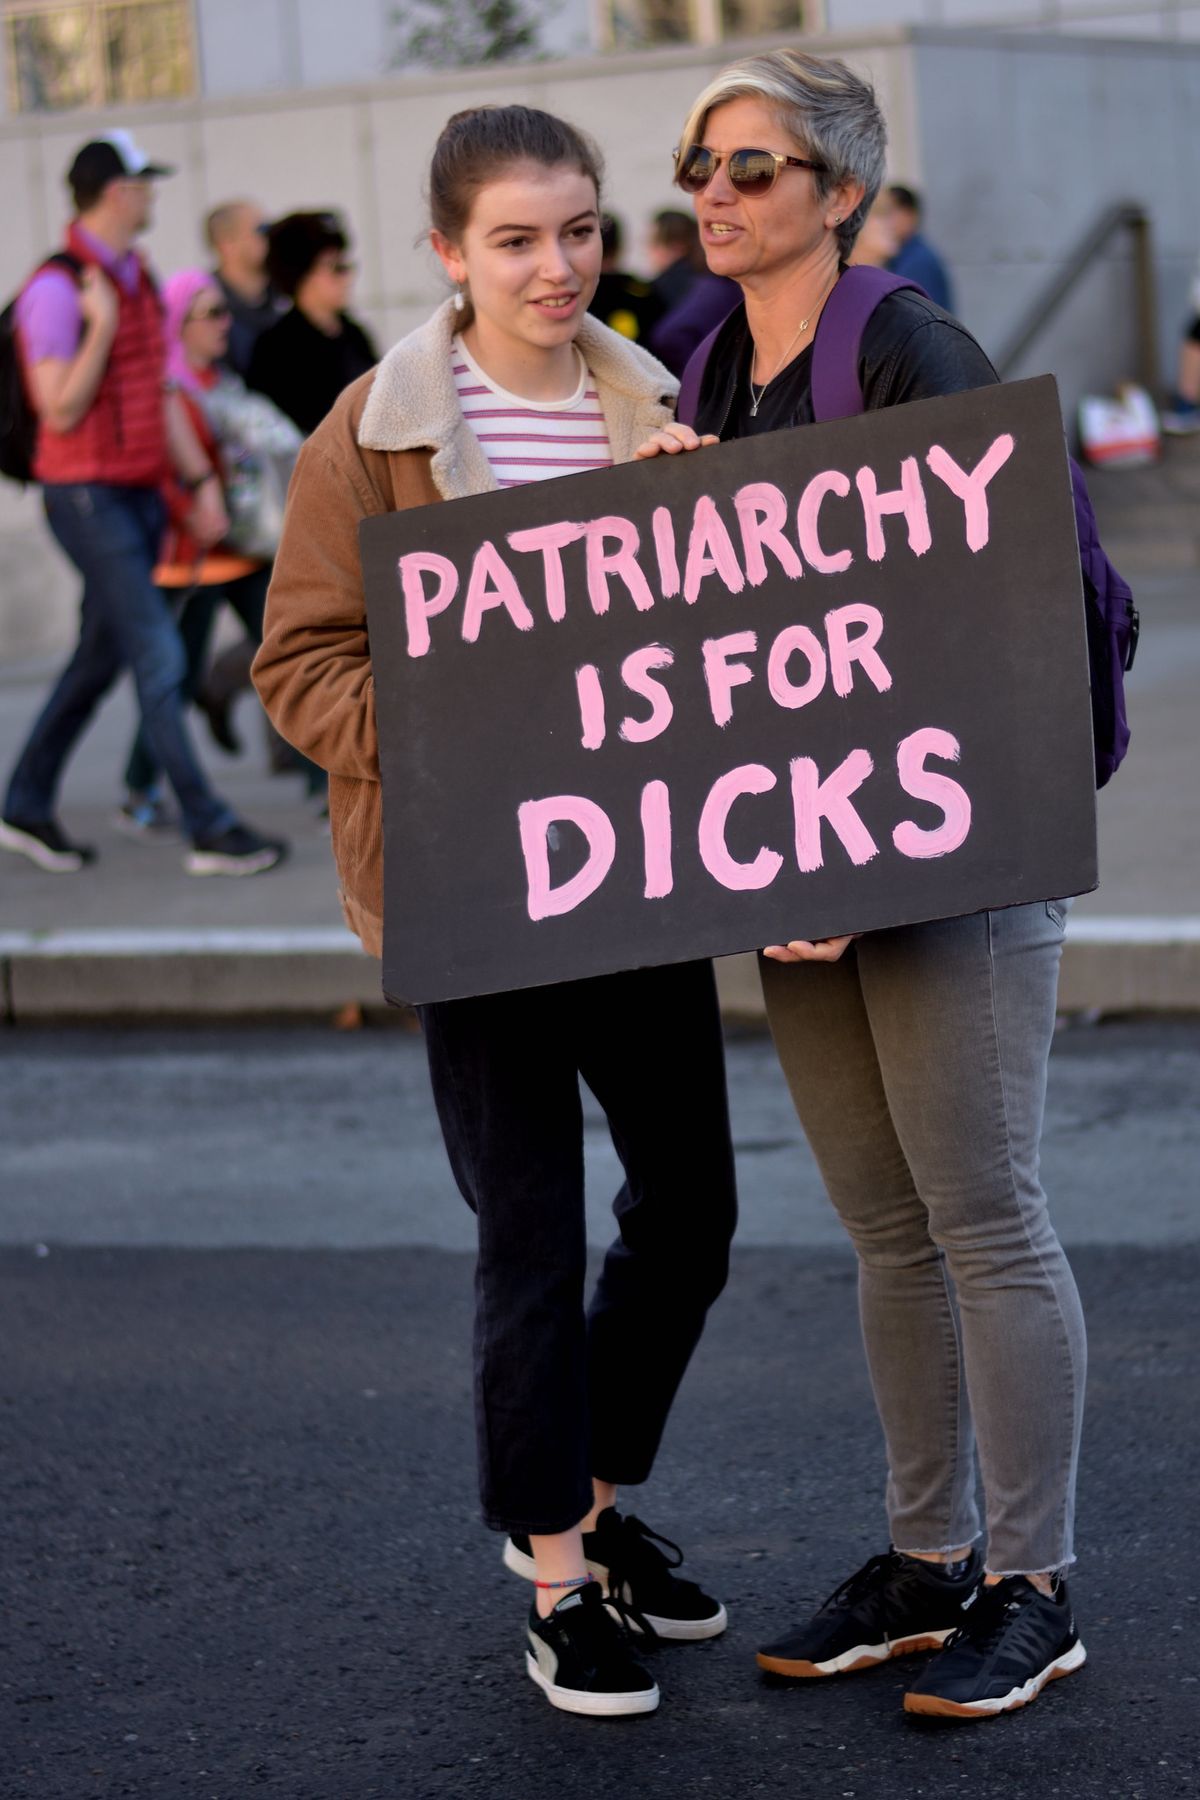 Image for article: Why We Need the Patriarchy